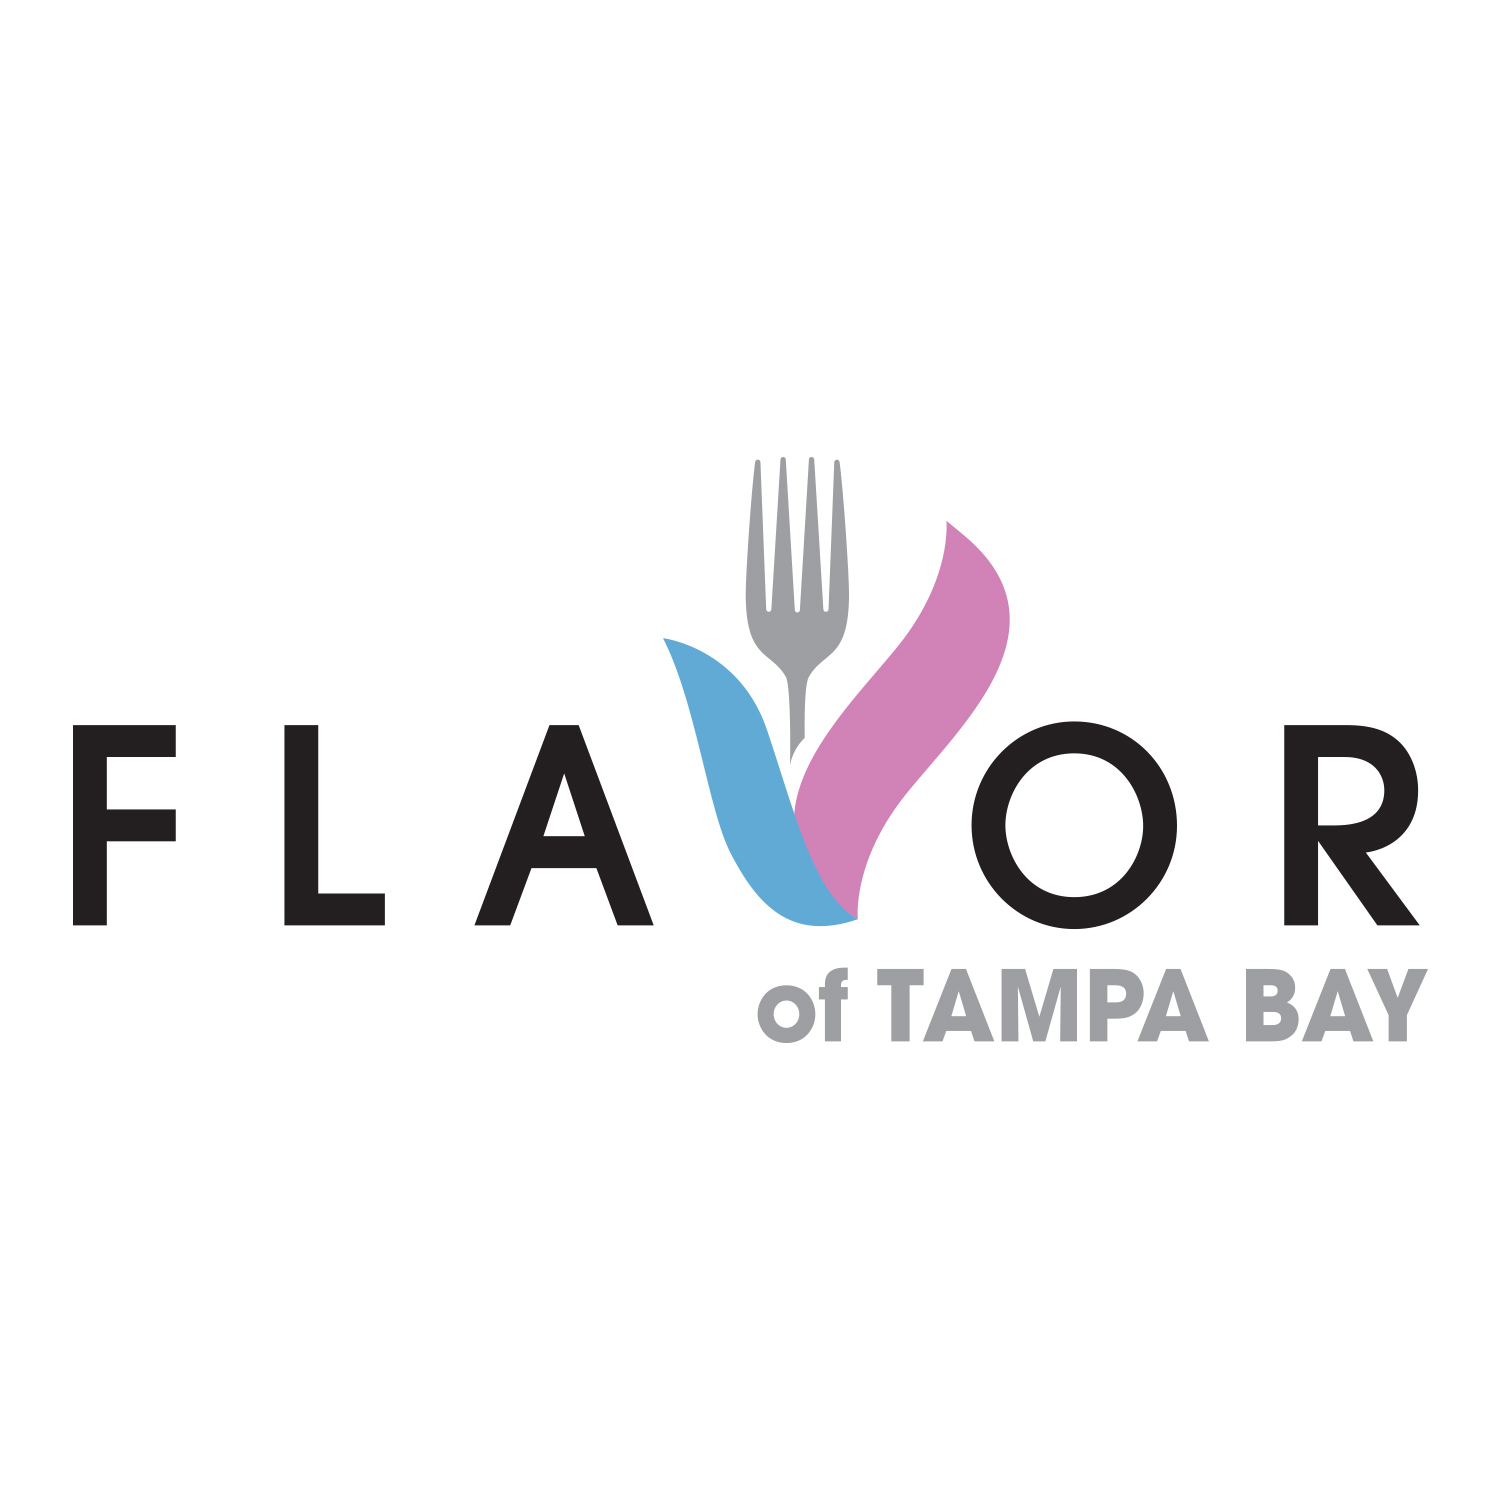 Flavor of Tampa Bay